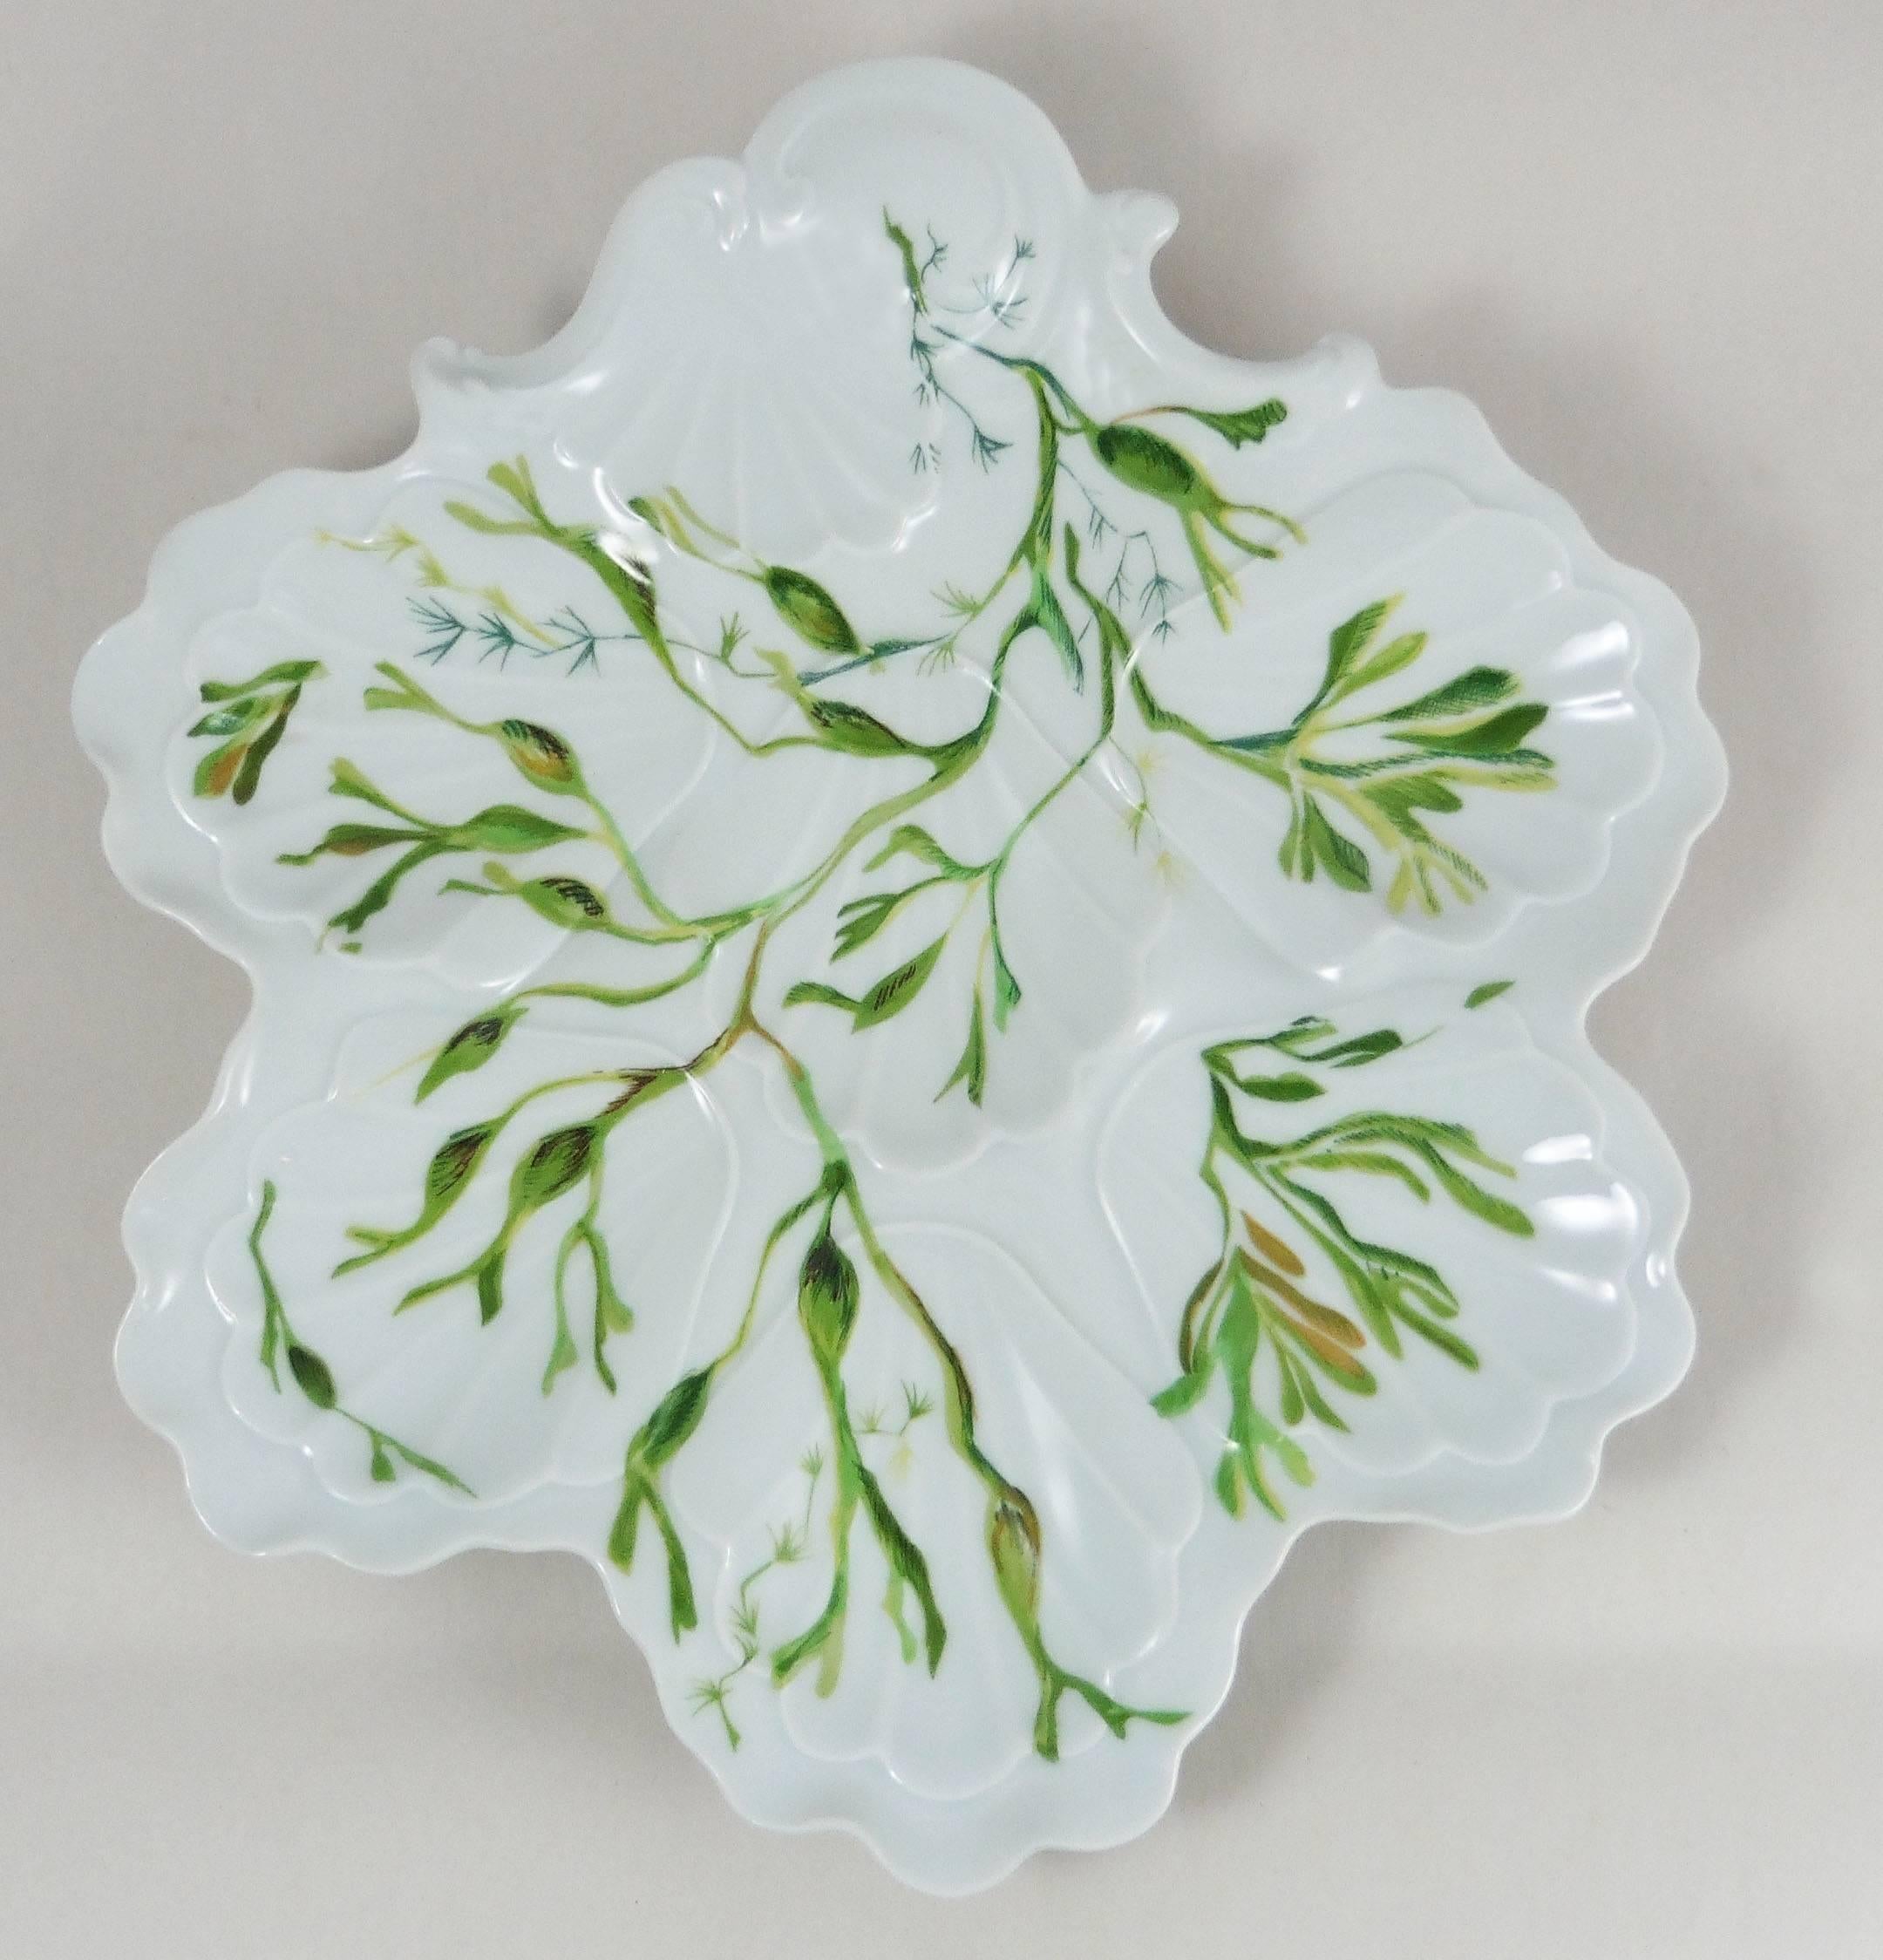 Porcelain oyster plate with seaweeds Limoges, circa 1900.
Two plates are available.